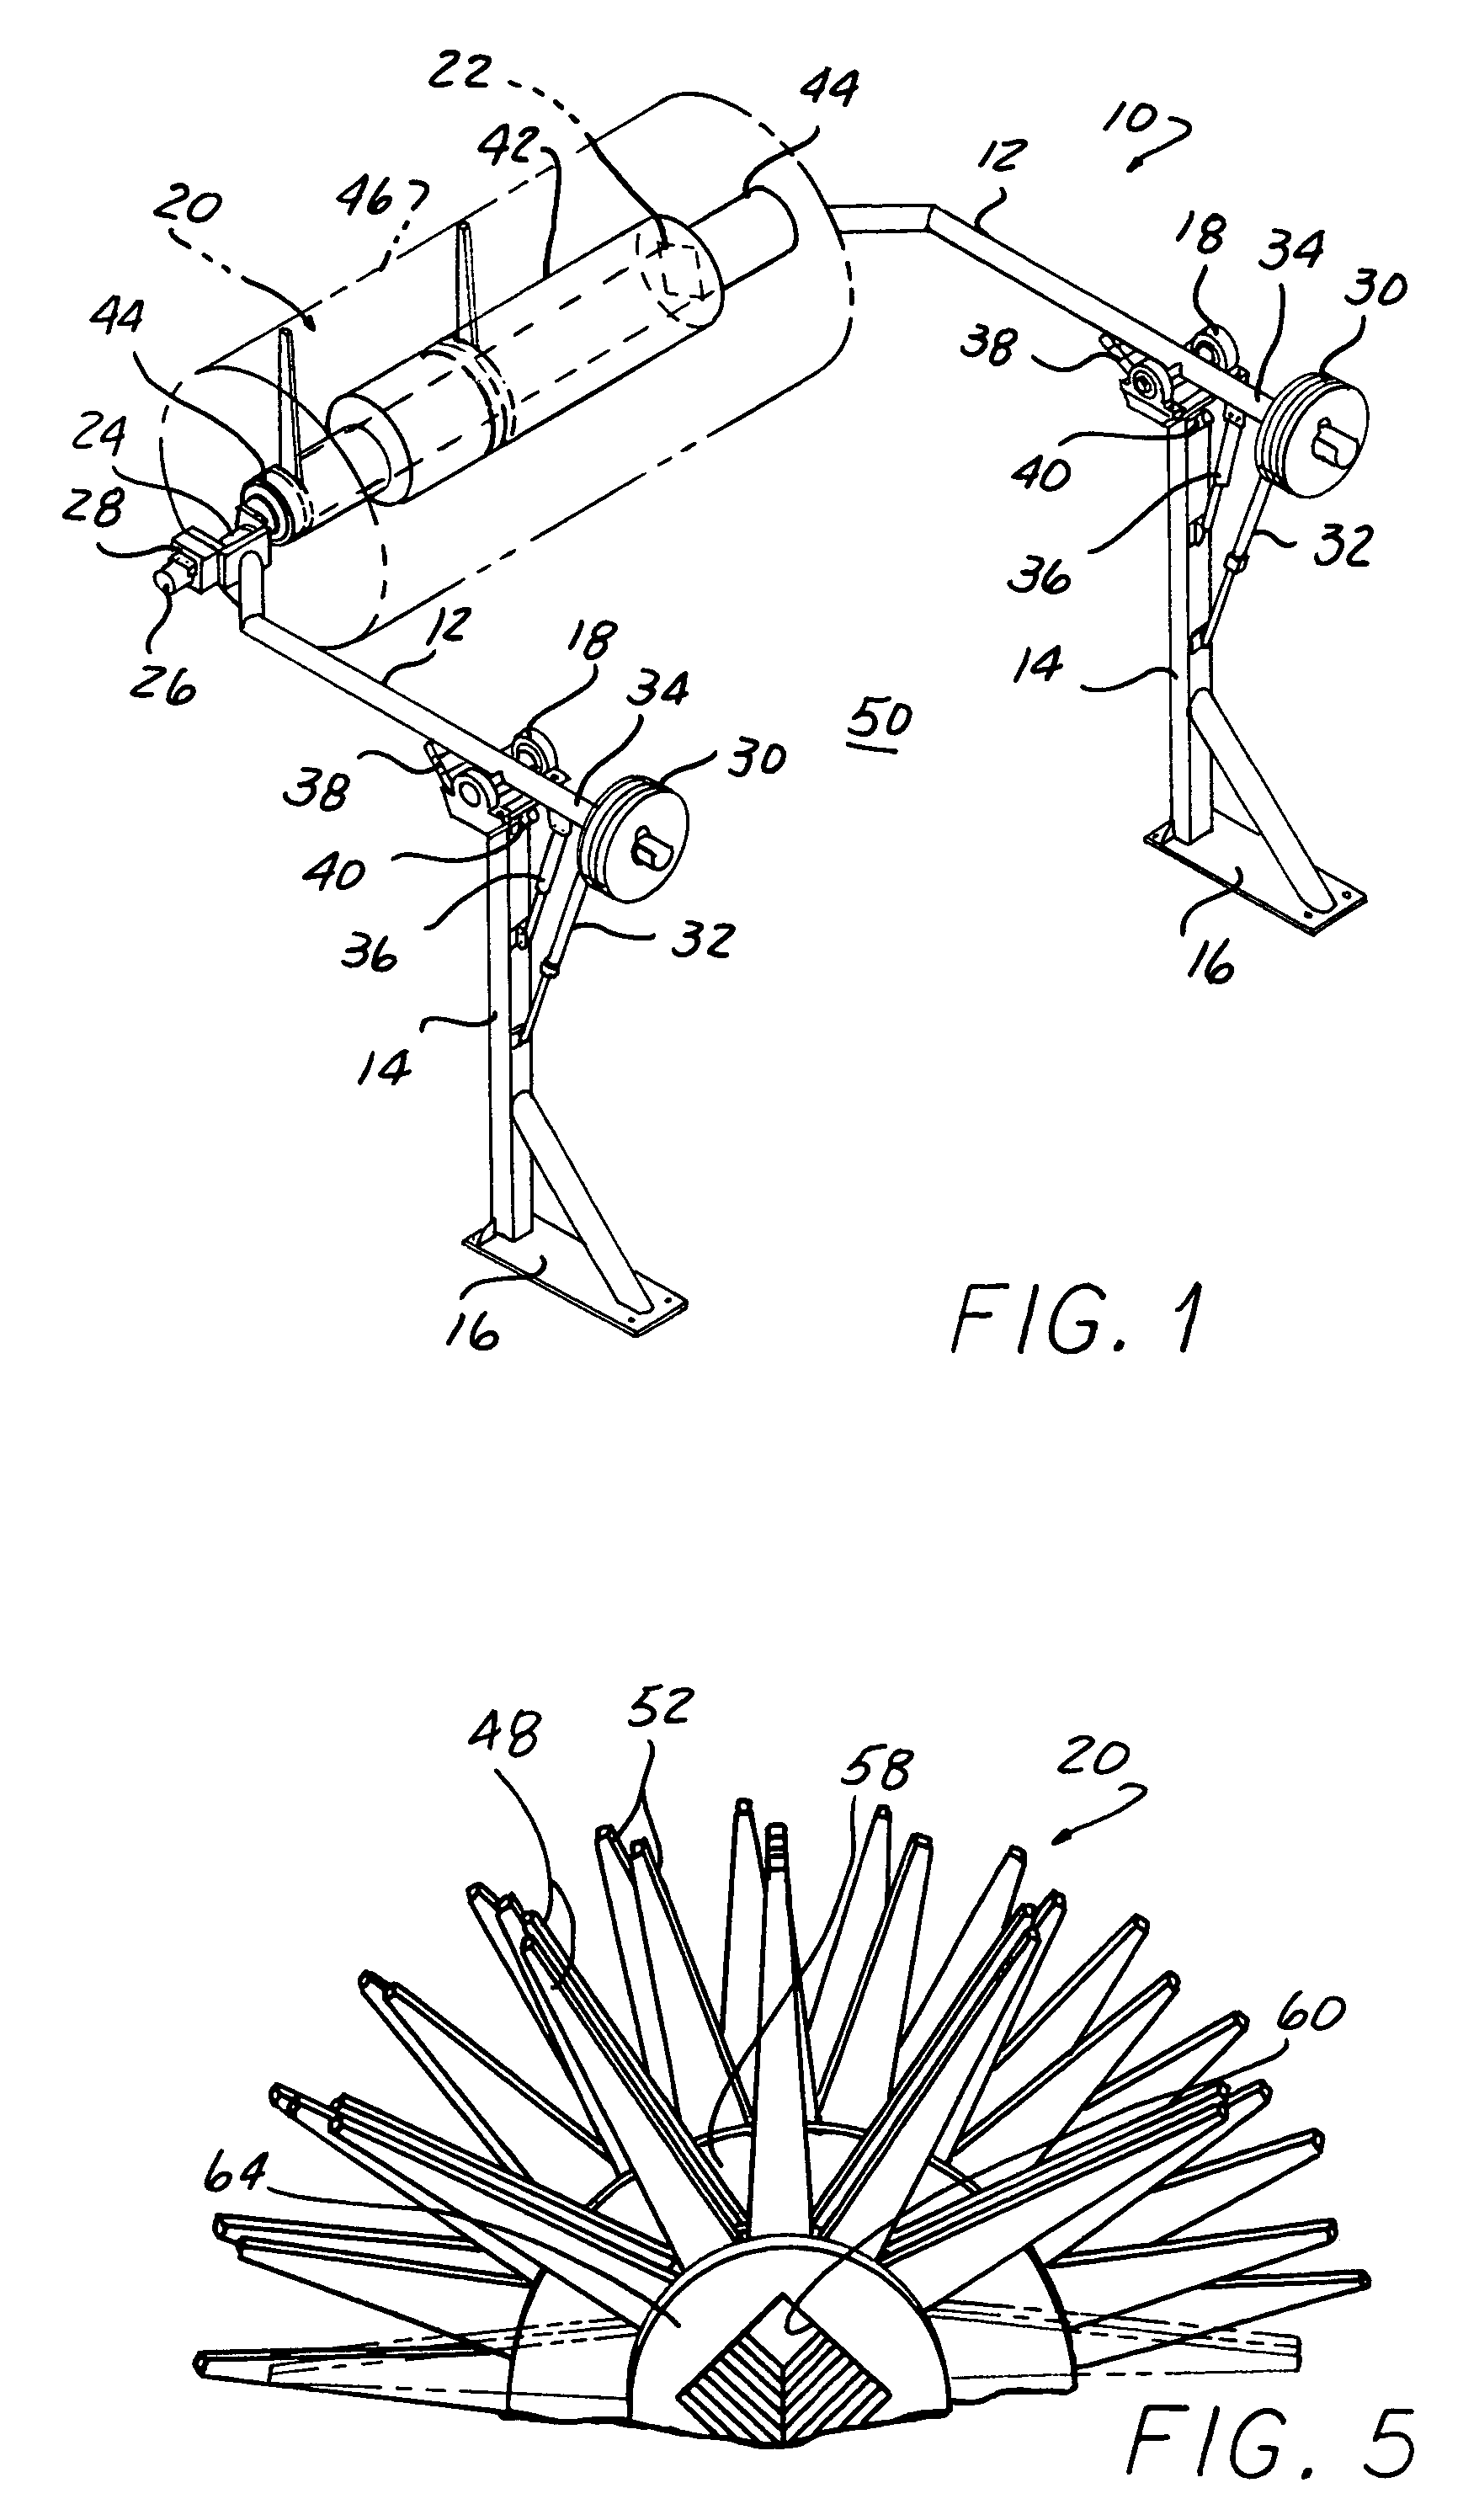 Brush and method for car wash